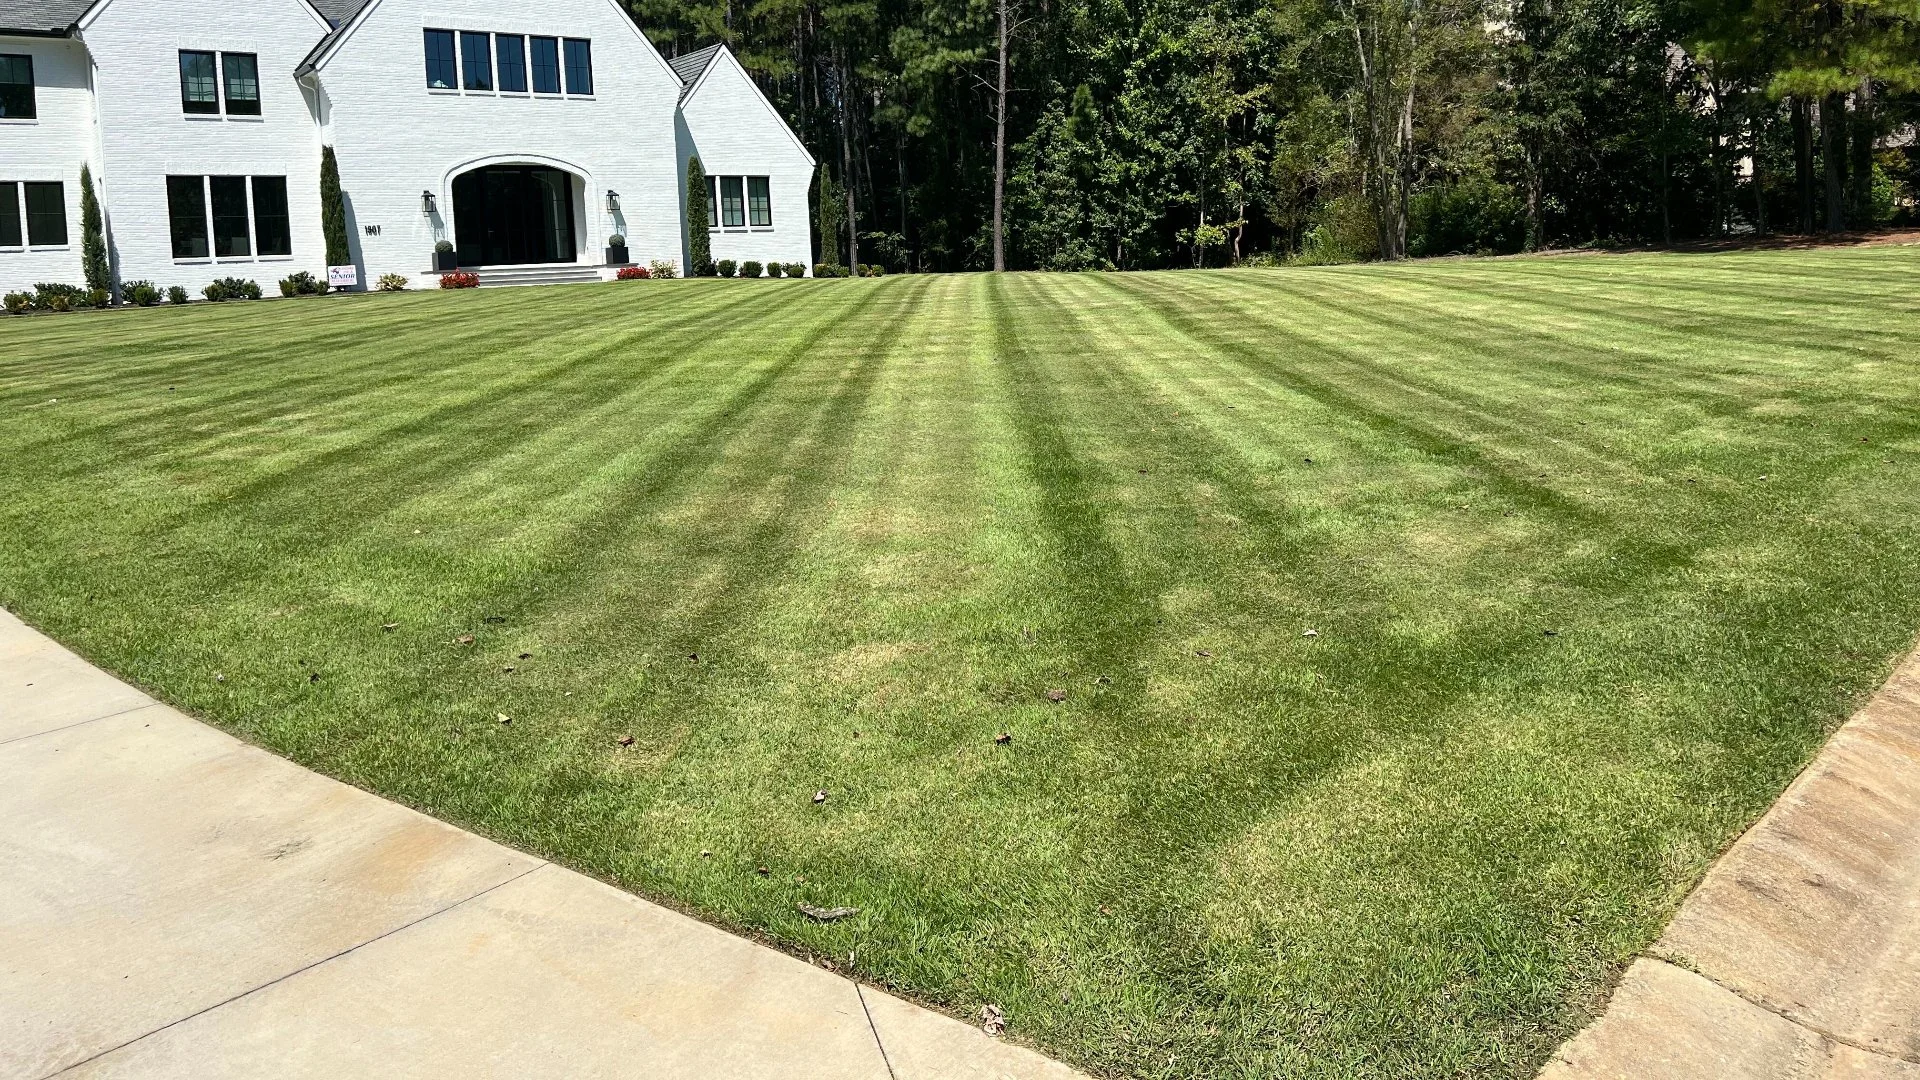 Lawn Mowing Isn't as Simple as It Sounds - 3 Mistakes You Could Be Making